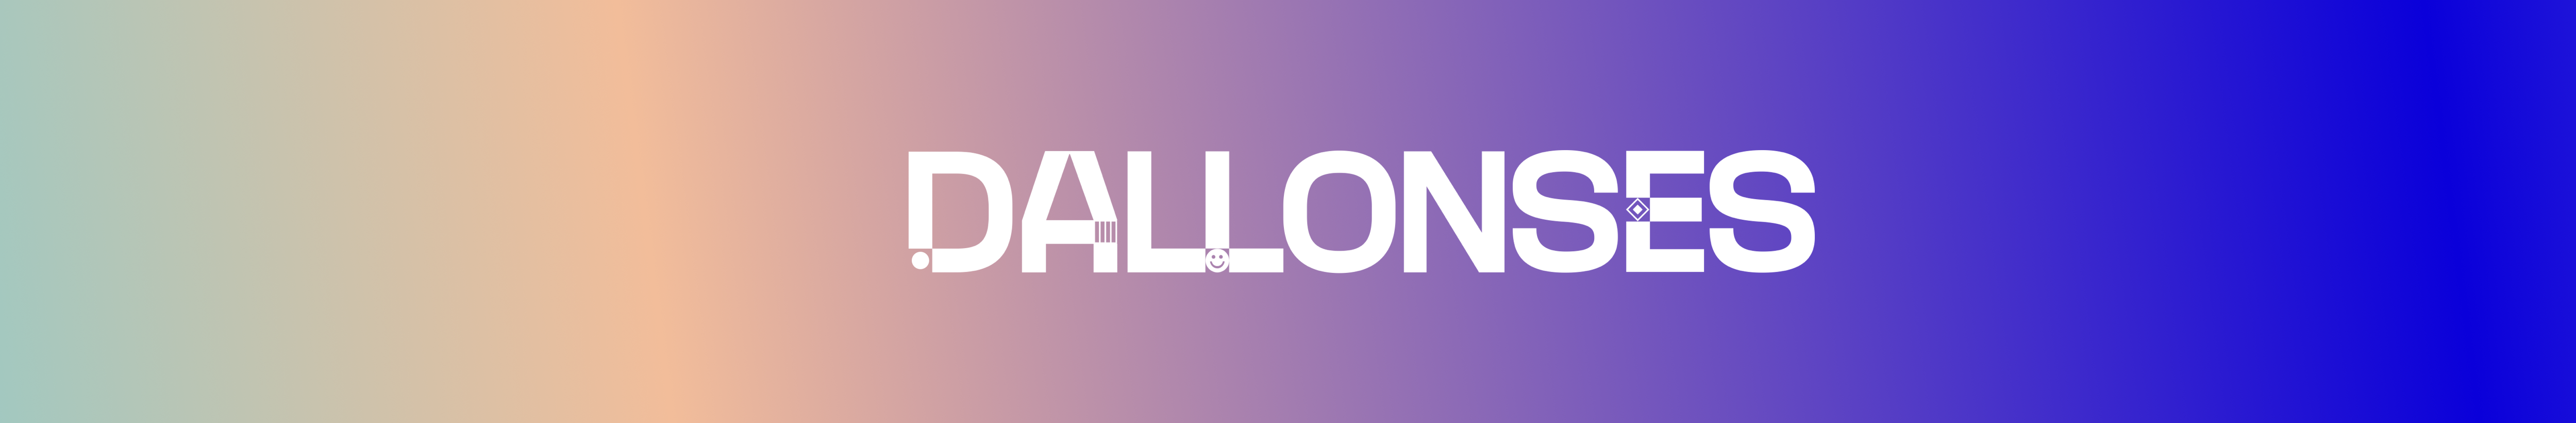 Dallonses Agency's profile banner